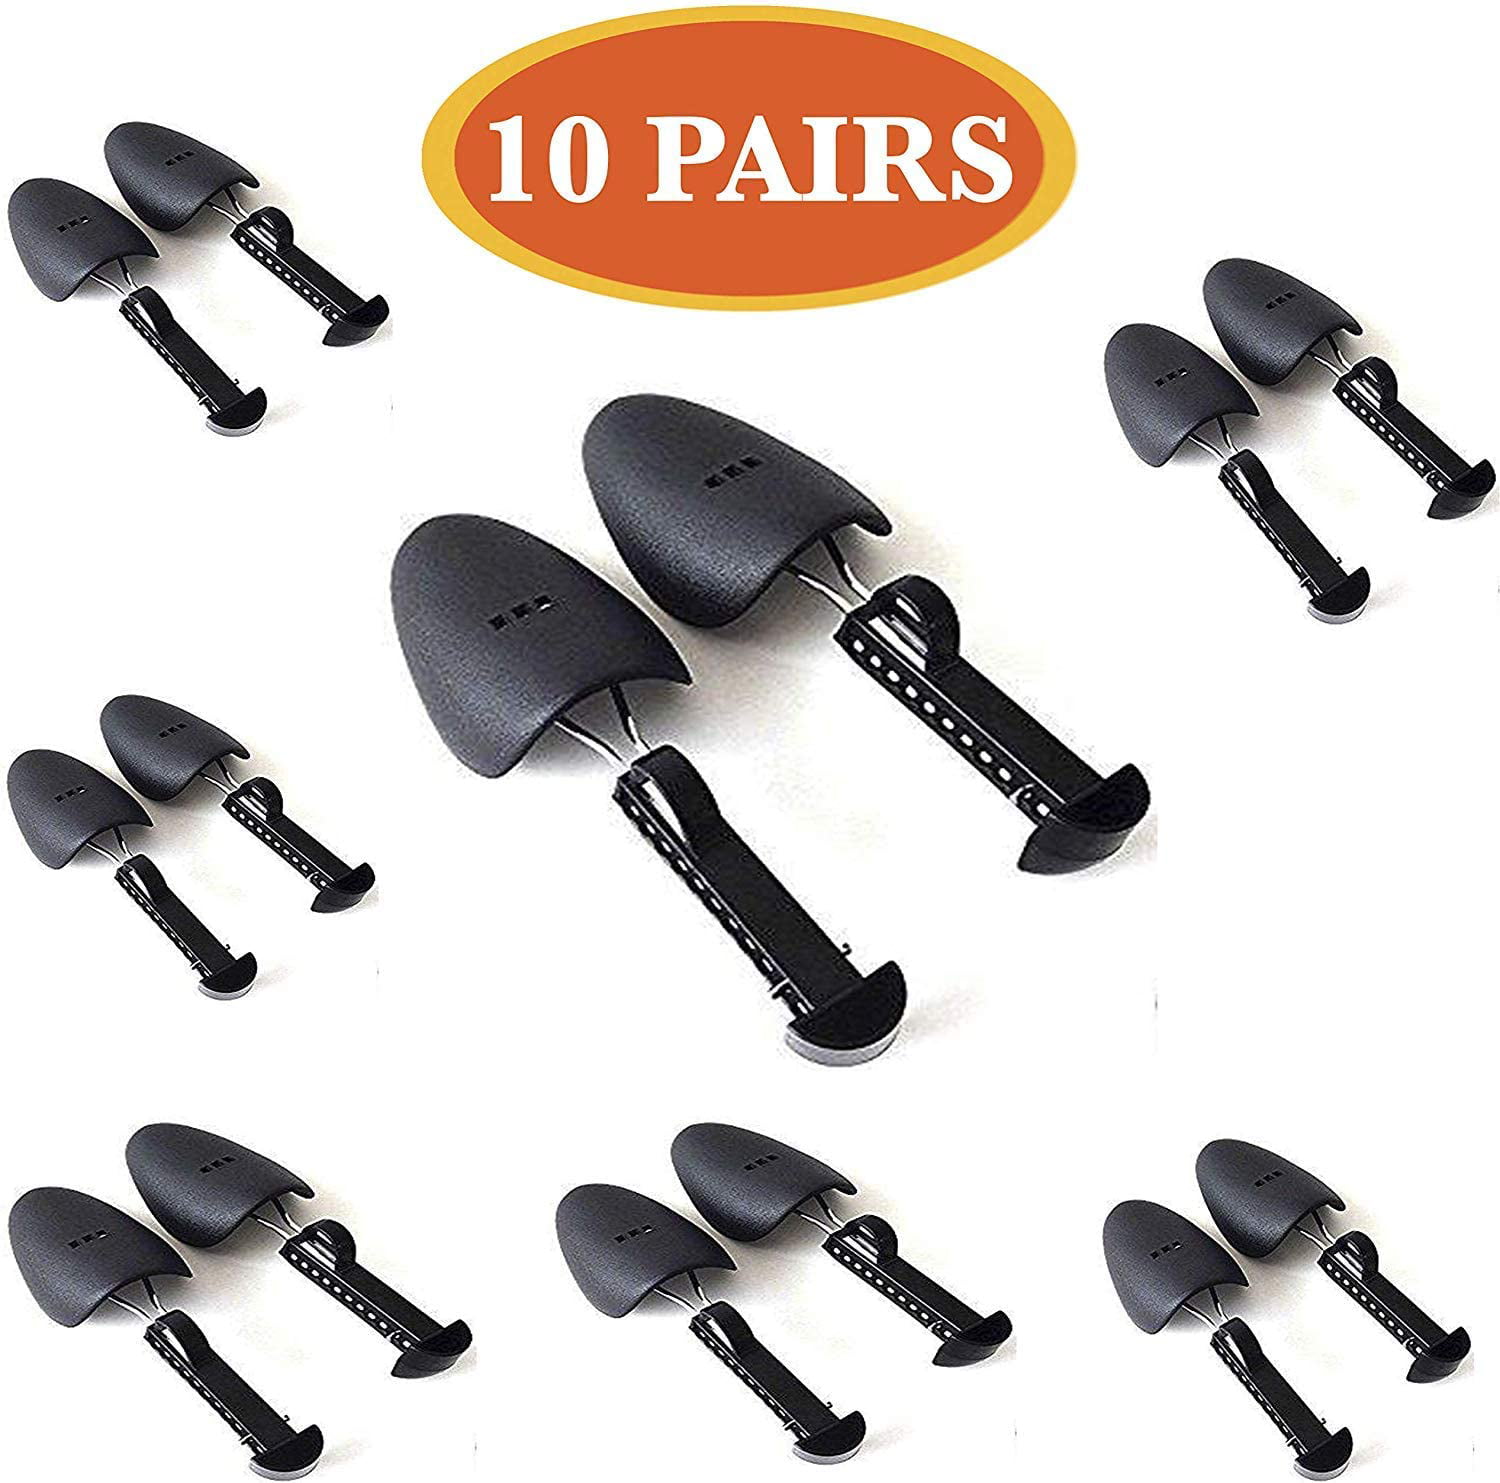 10 Pair/ Mens Shoe Trees Plastic Spring Shaper Keeper Stretcher Home&Shoe Store 